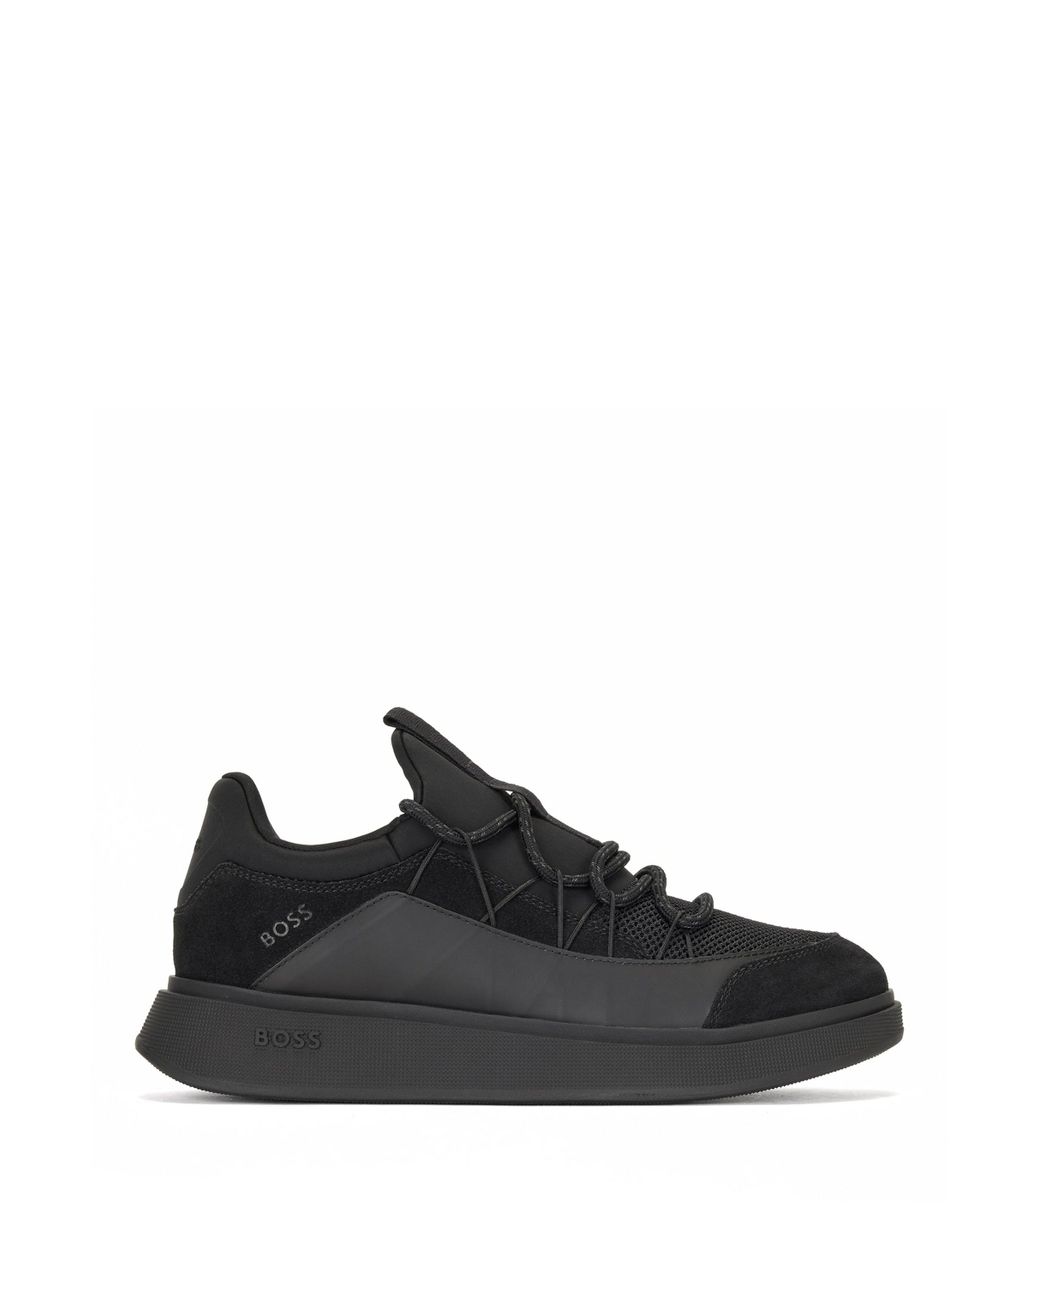 Black Suede Mesh Accents Sneaker Trainers